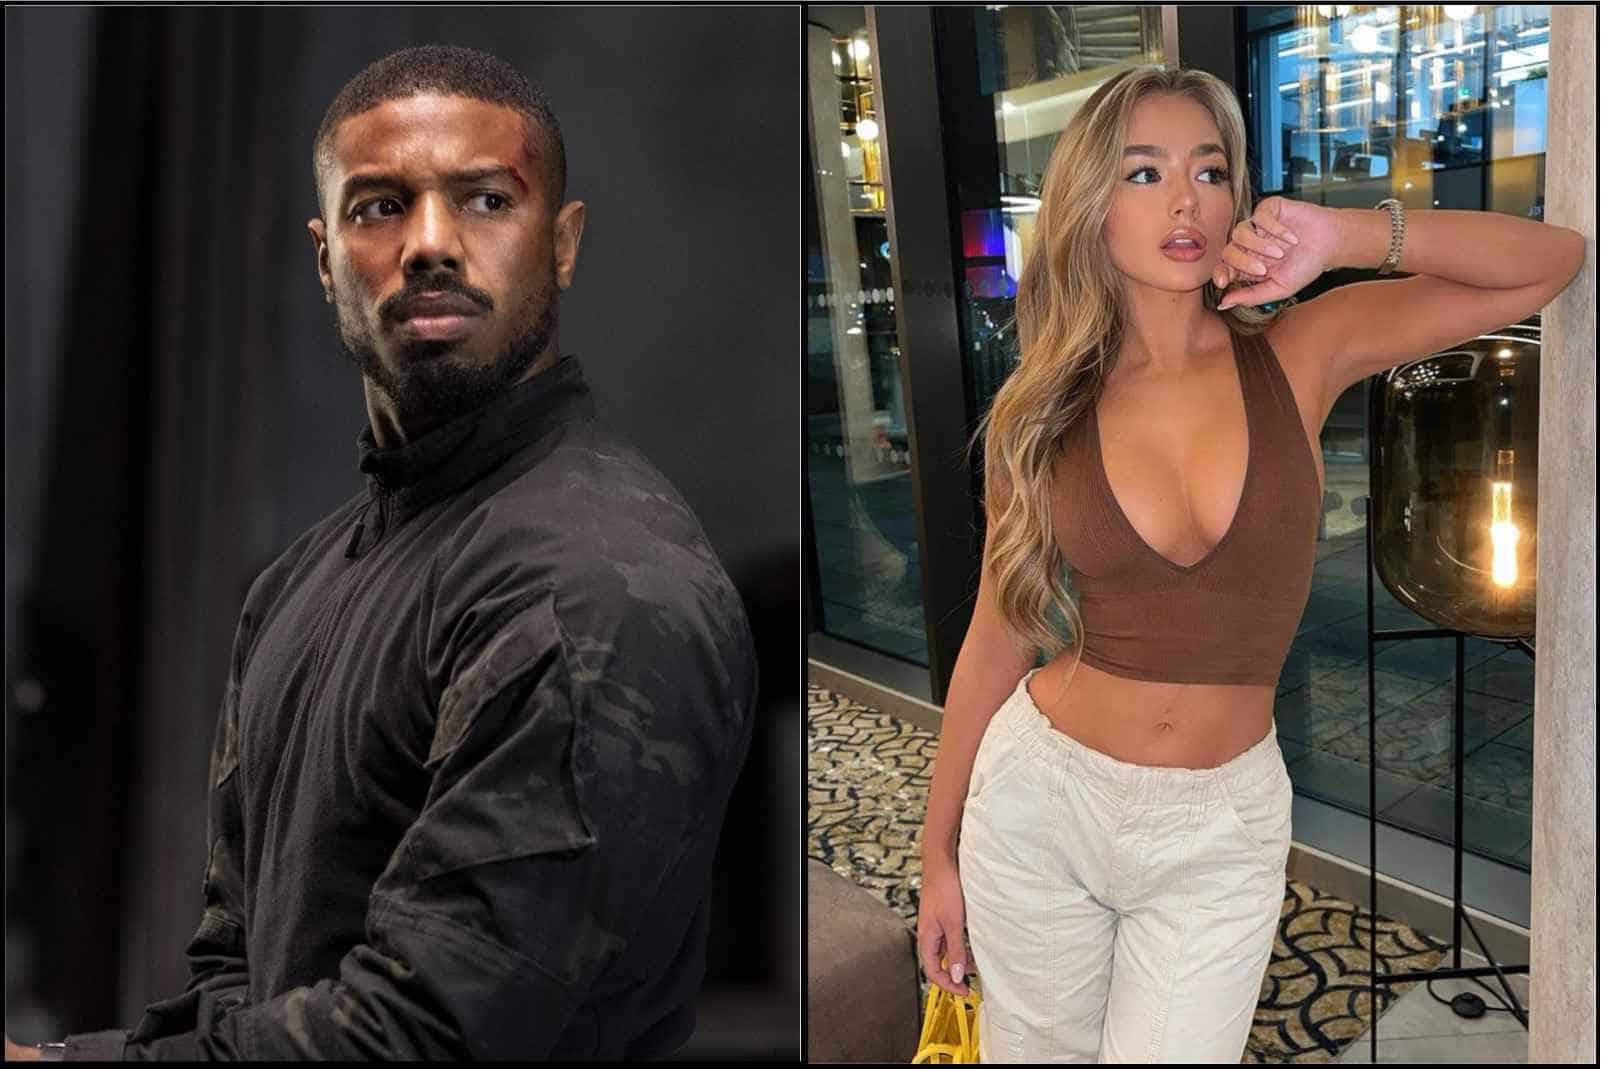 Amber Jepson Dating: Is The Model Dating The Black Panther Star?